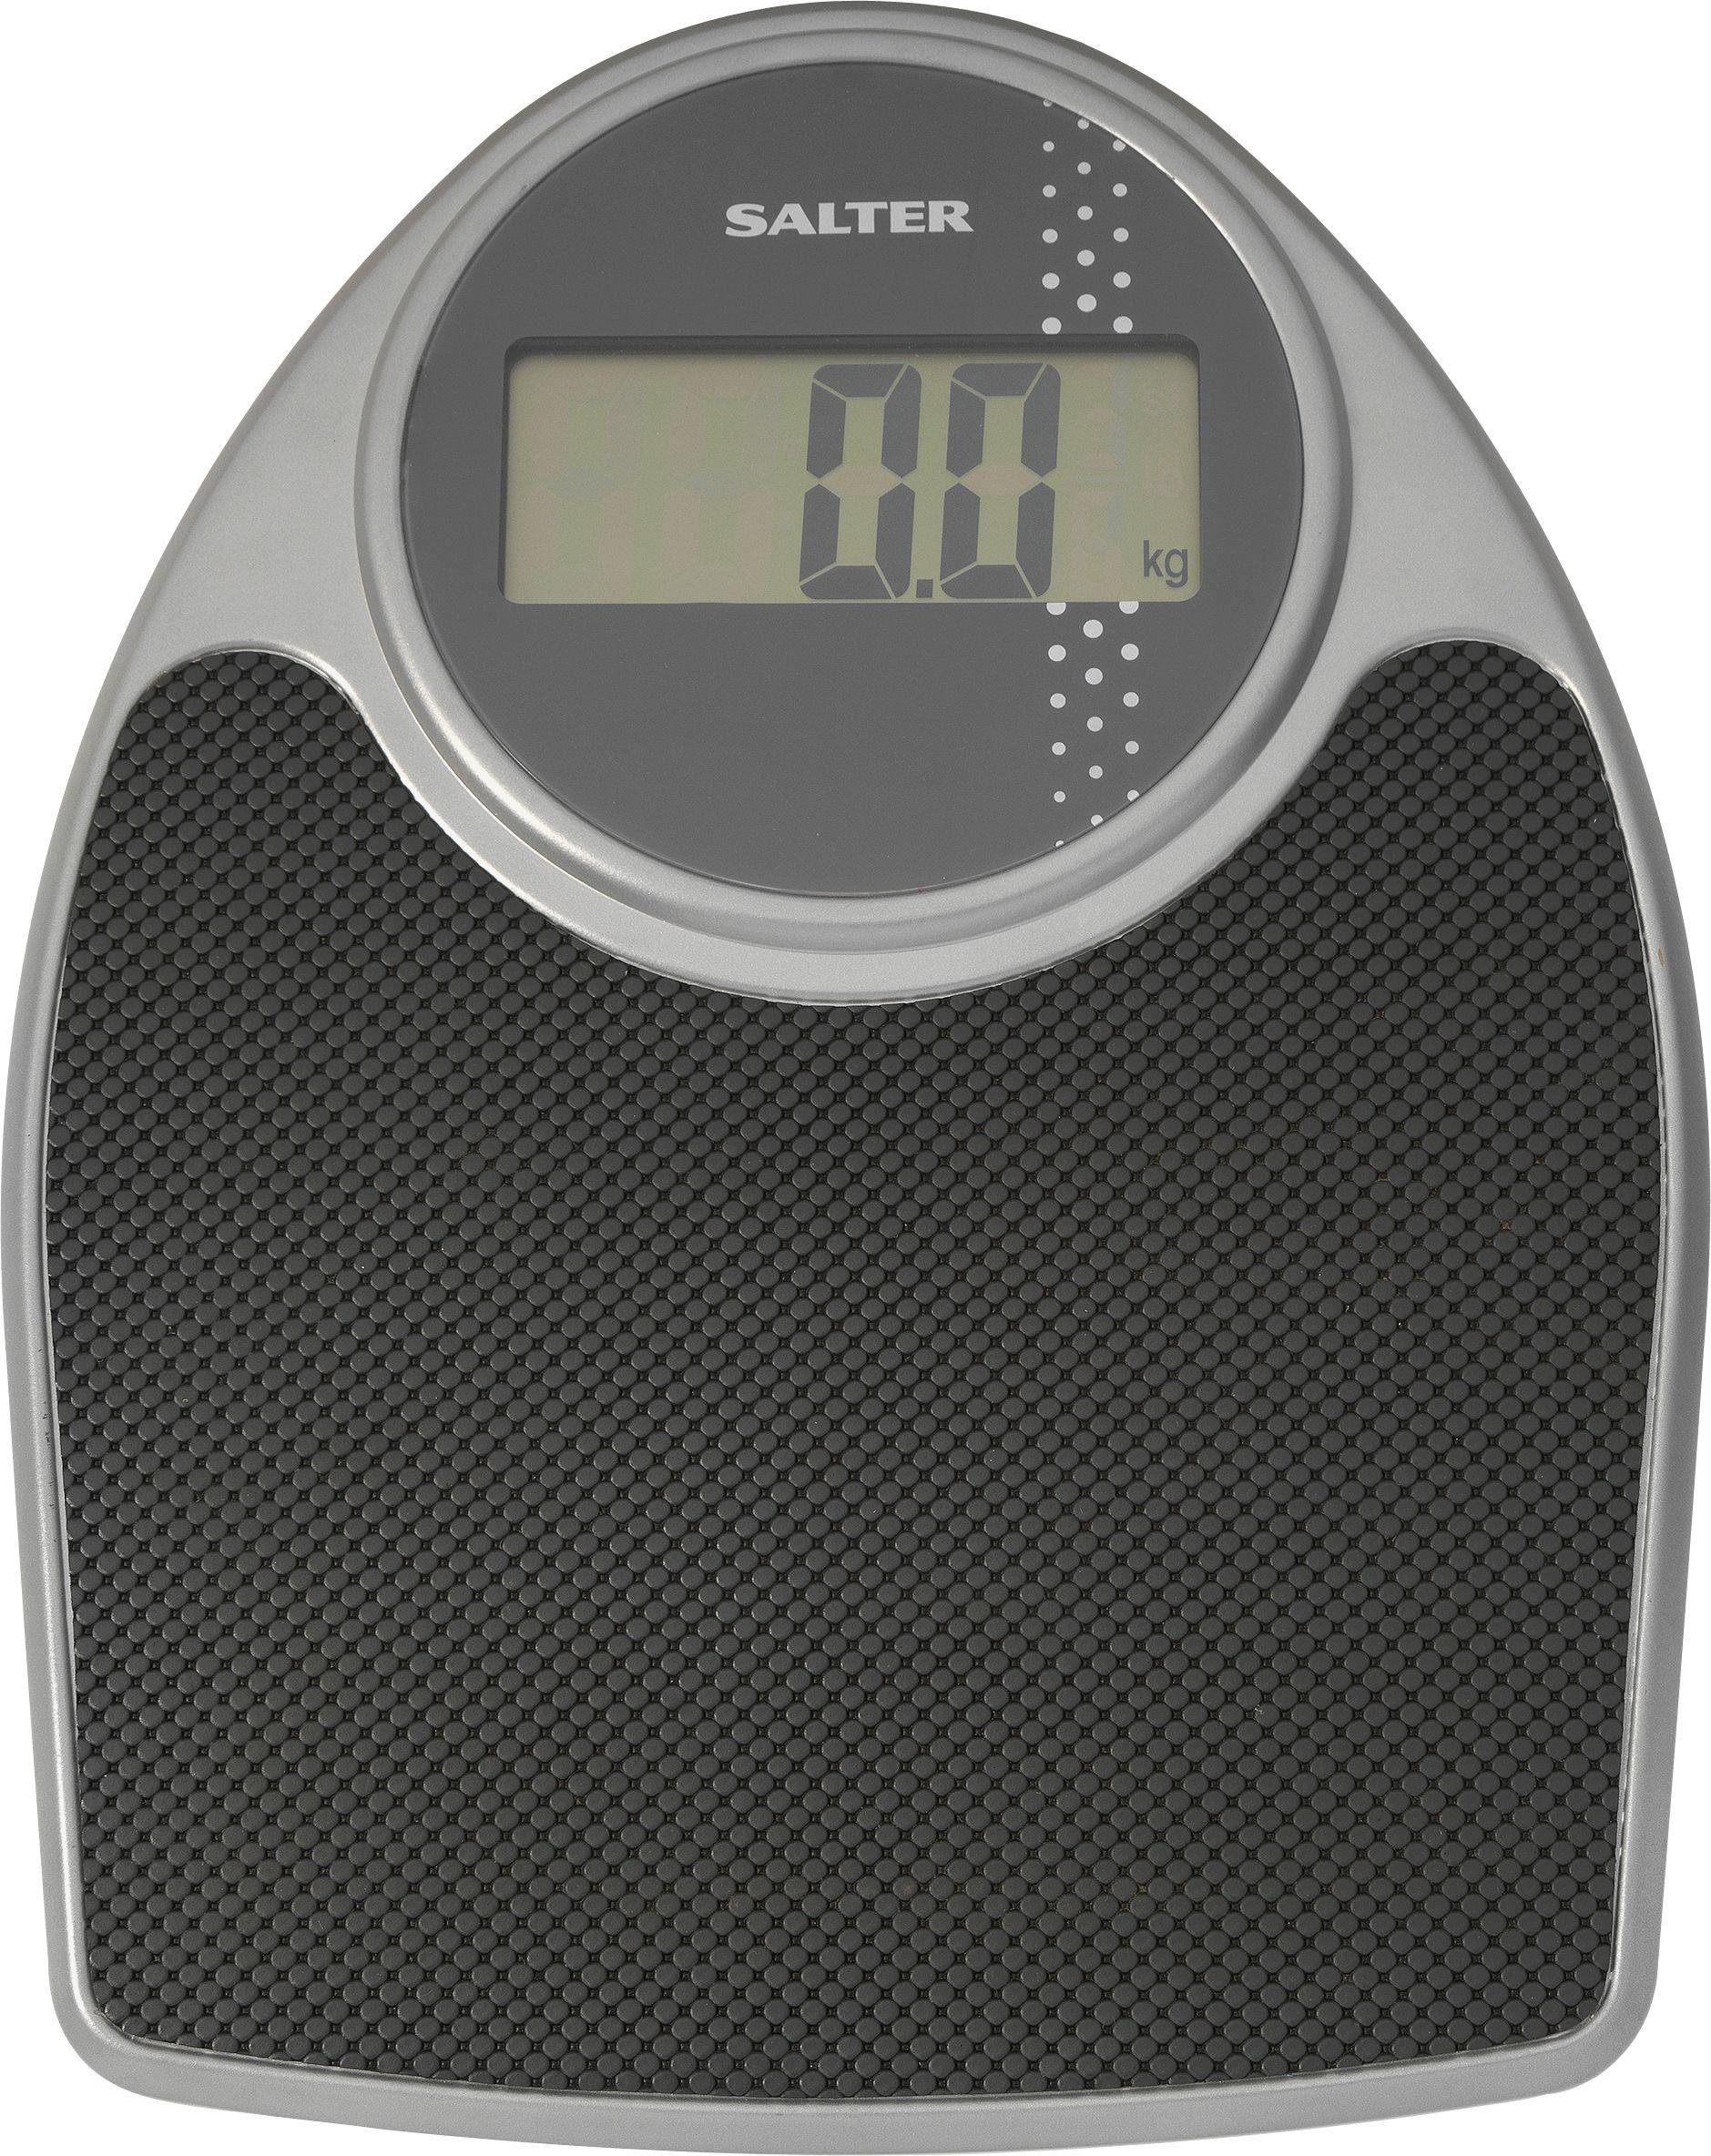 Salter Digital Doctors Style Electronic Scale